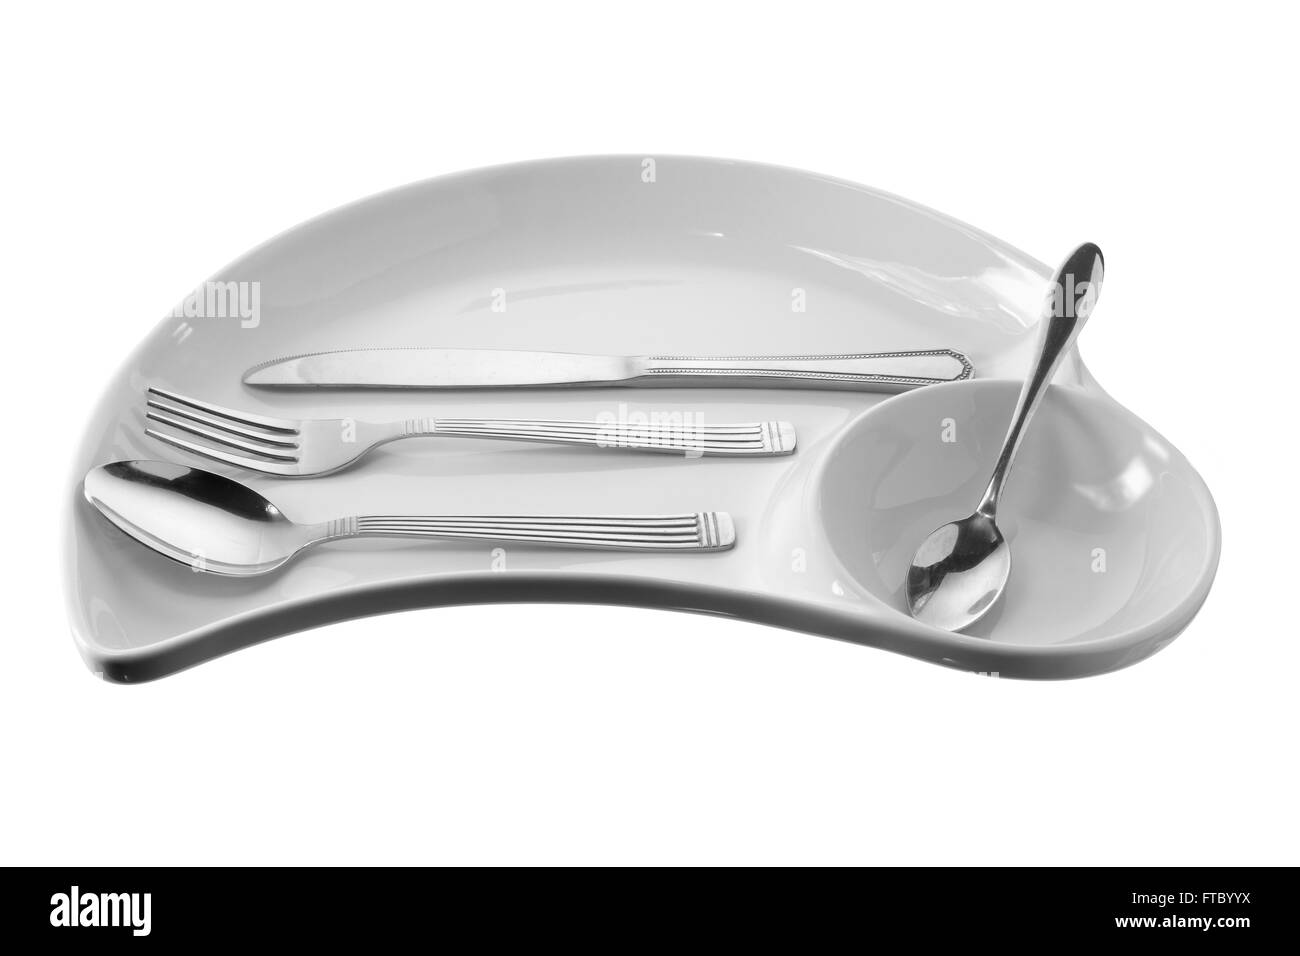 Plate with Cutlery Stock Photo